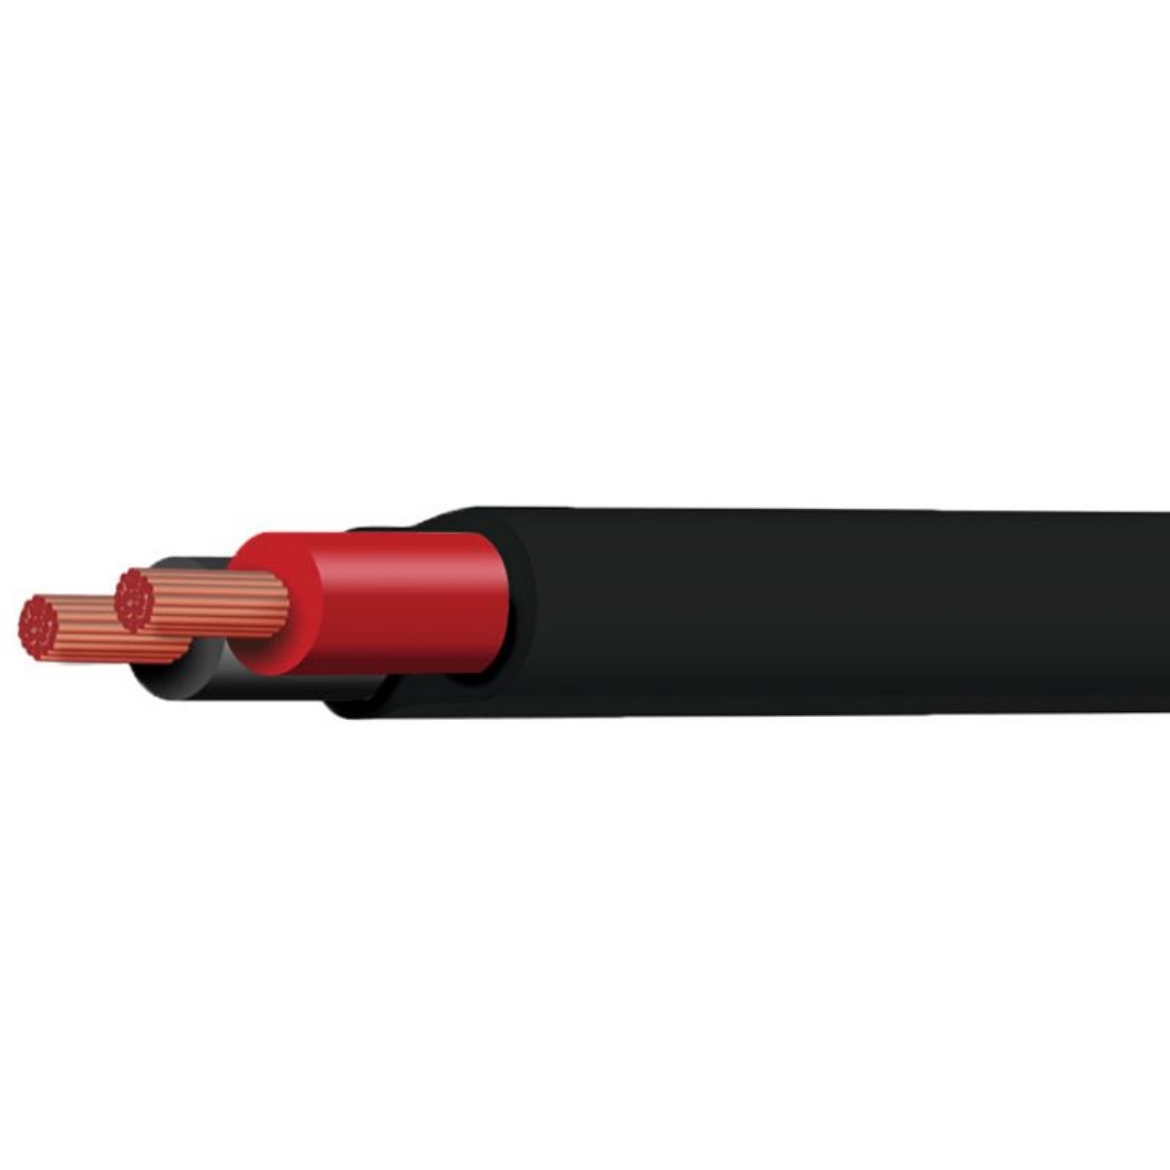 Picture of TYCAB 5MM TWIN CORE CABLE CUT 29A TWIN SHEATH BLACK/RED - PER METER